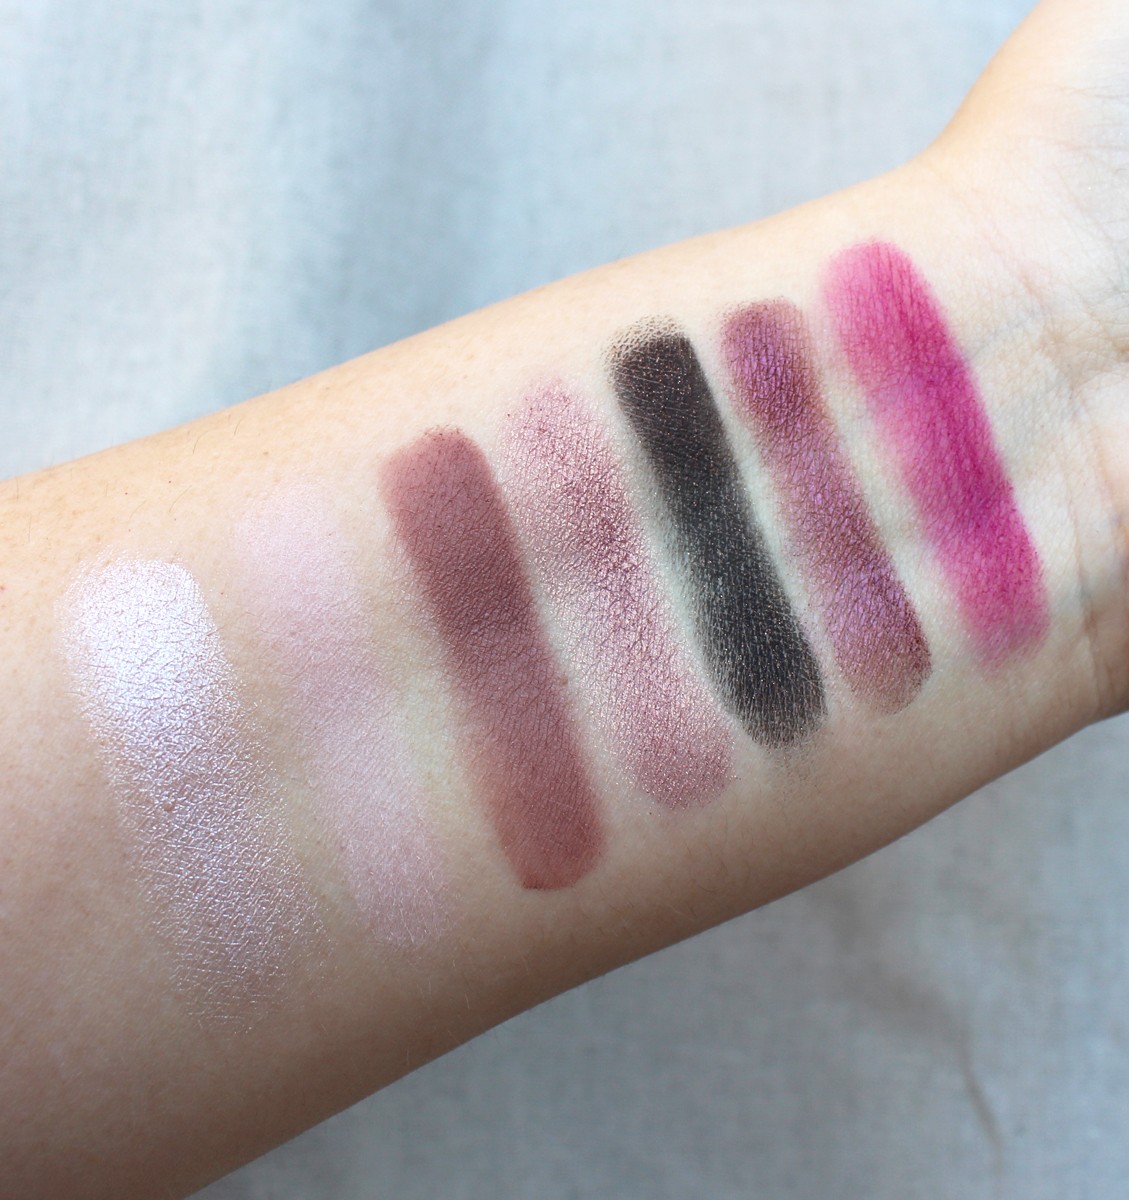 Marc Jacobs Beauty Eye Conic Eyeshadow Palette Provocouture Swatches